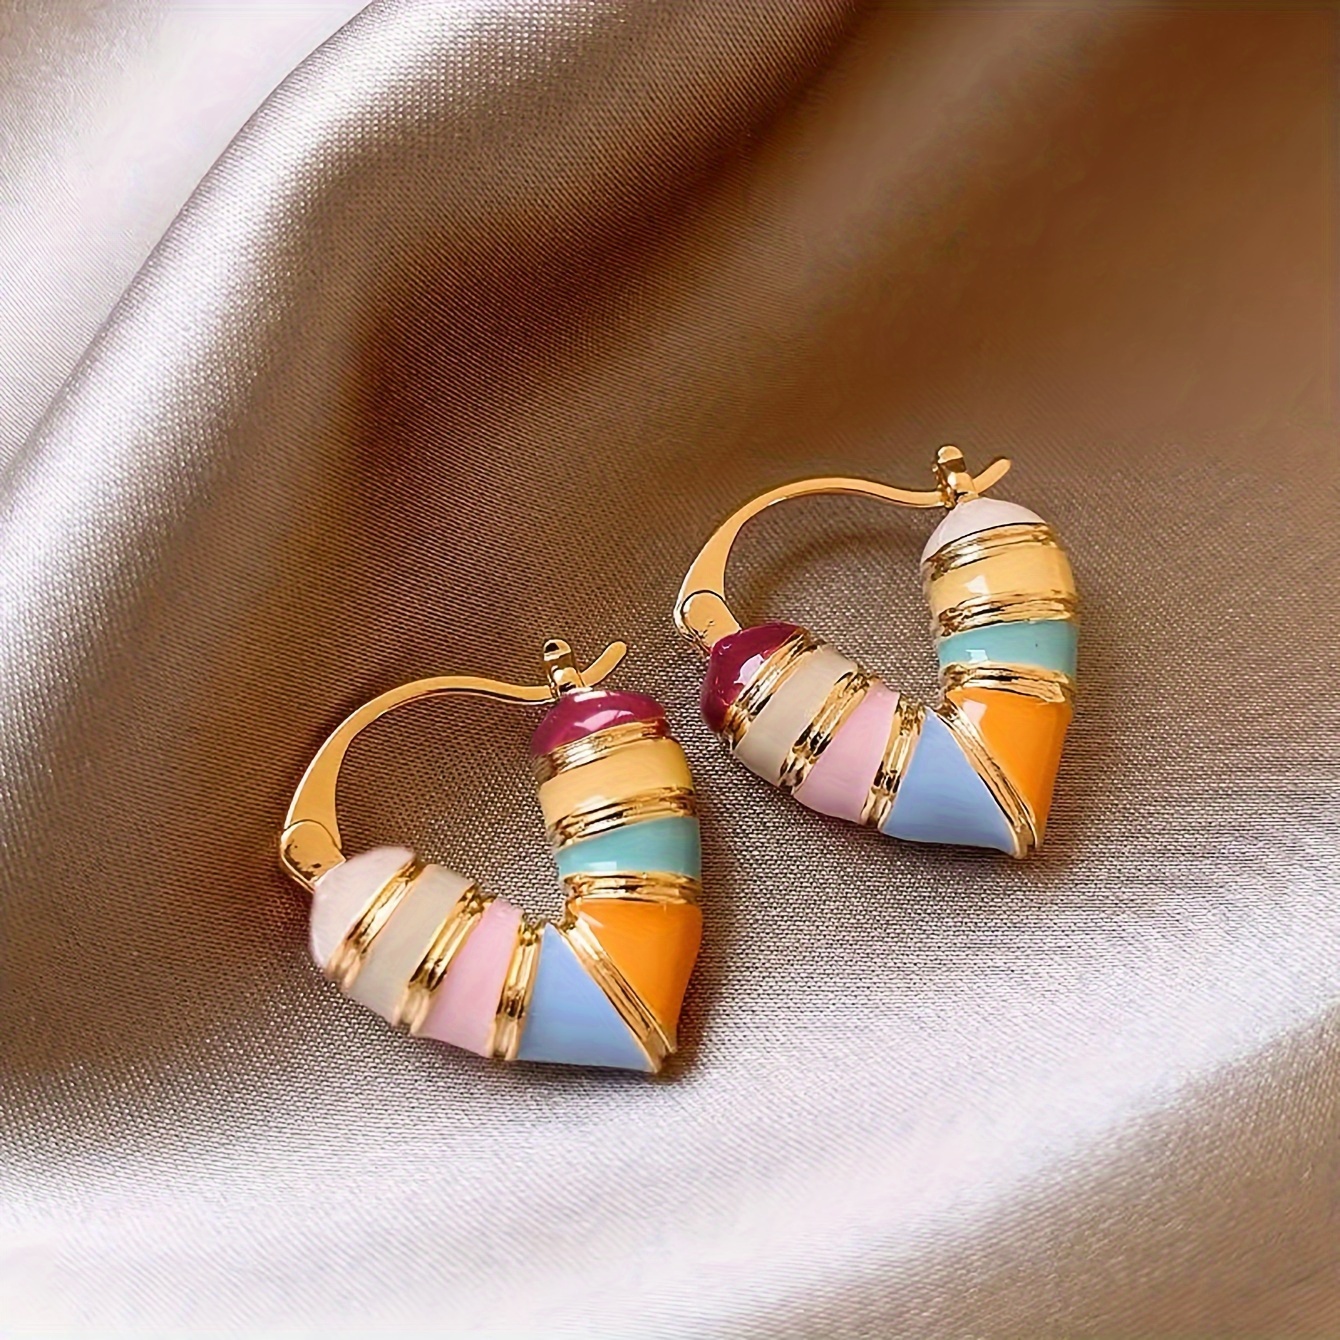 

Colorful Heart-shaped Earrings, 1 Pair, Retro Resort Style, Zinc Alloy Fashion Jewelry, Chic Aesthetics, Simple And Elegant Design, Daily Commuting Accessories, Fashionable Women